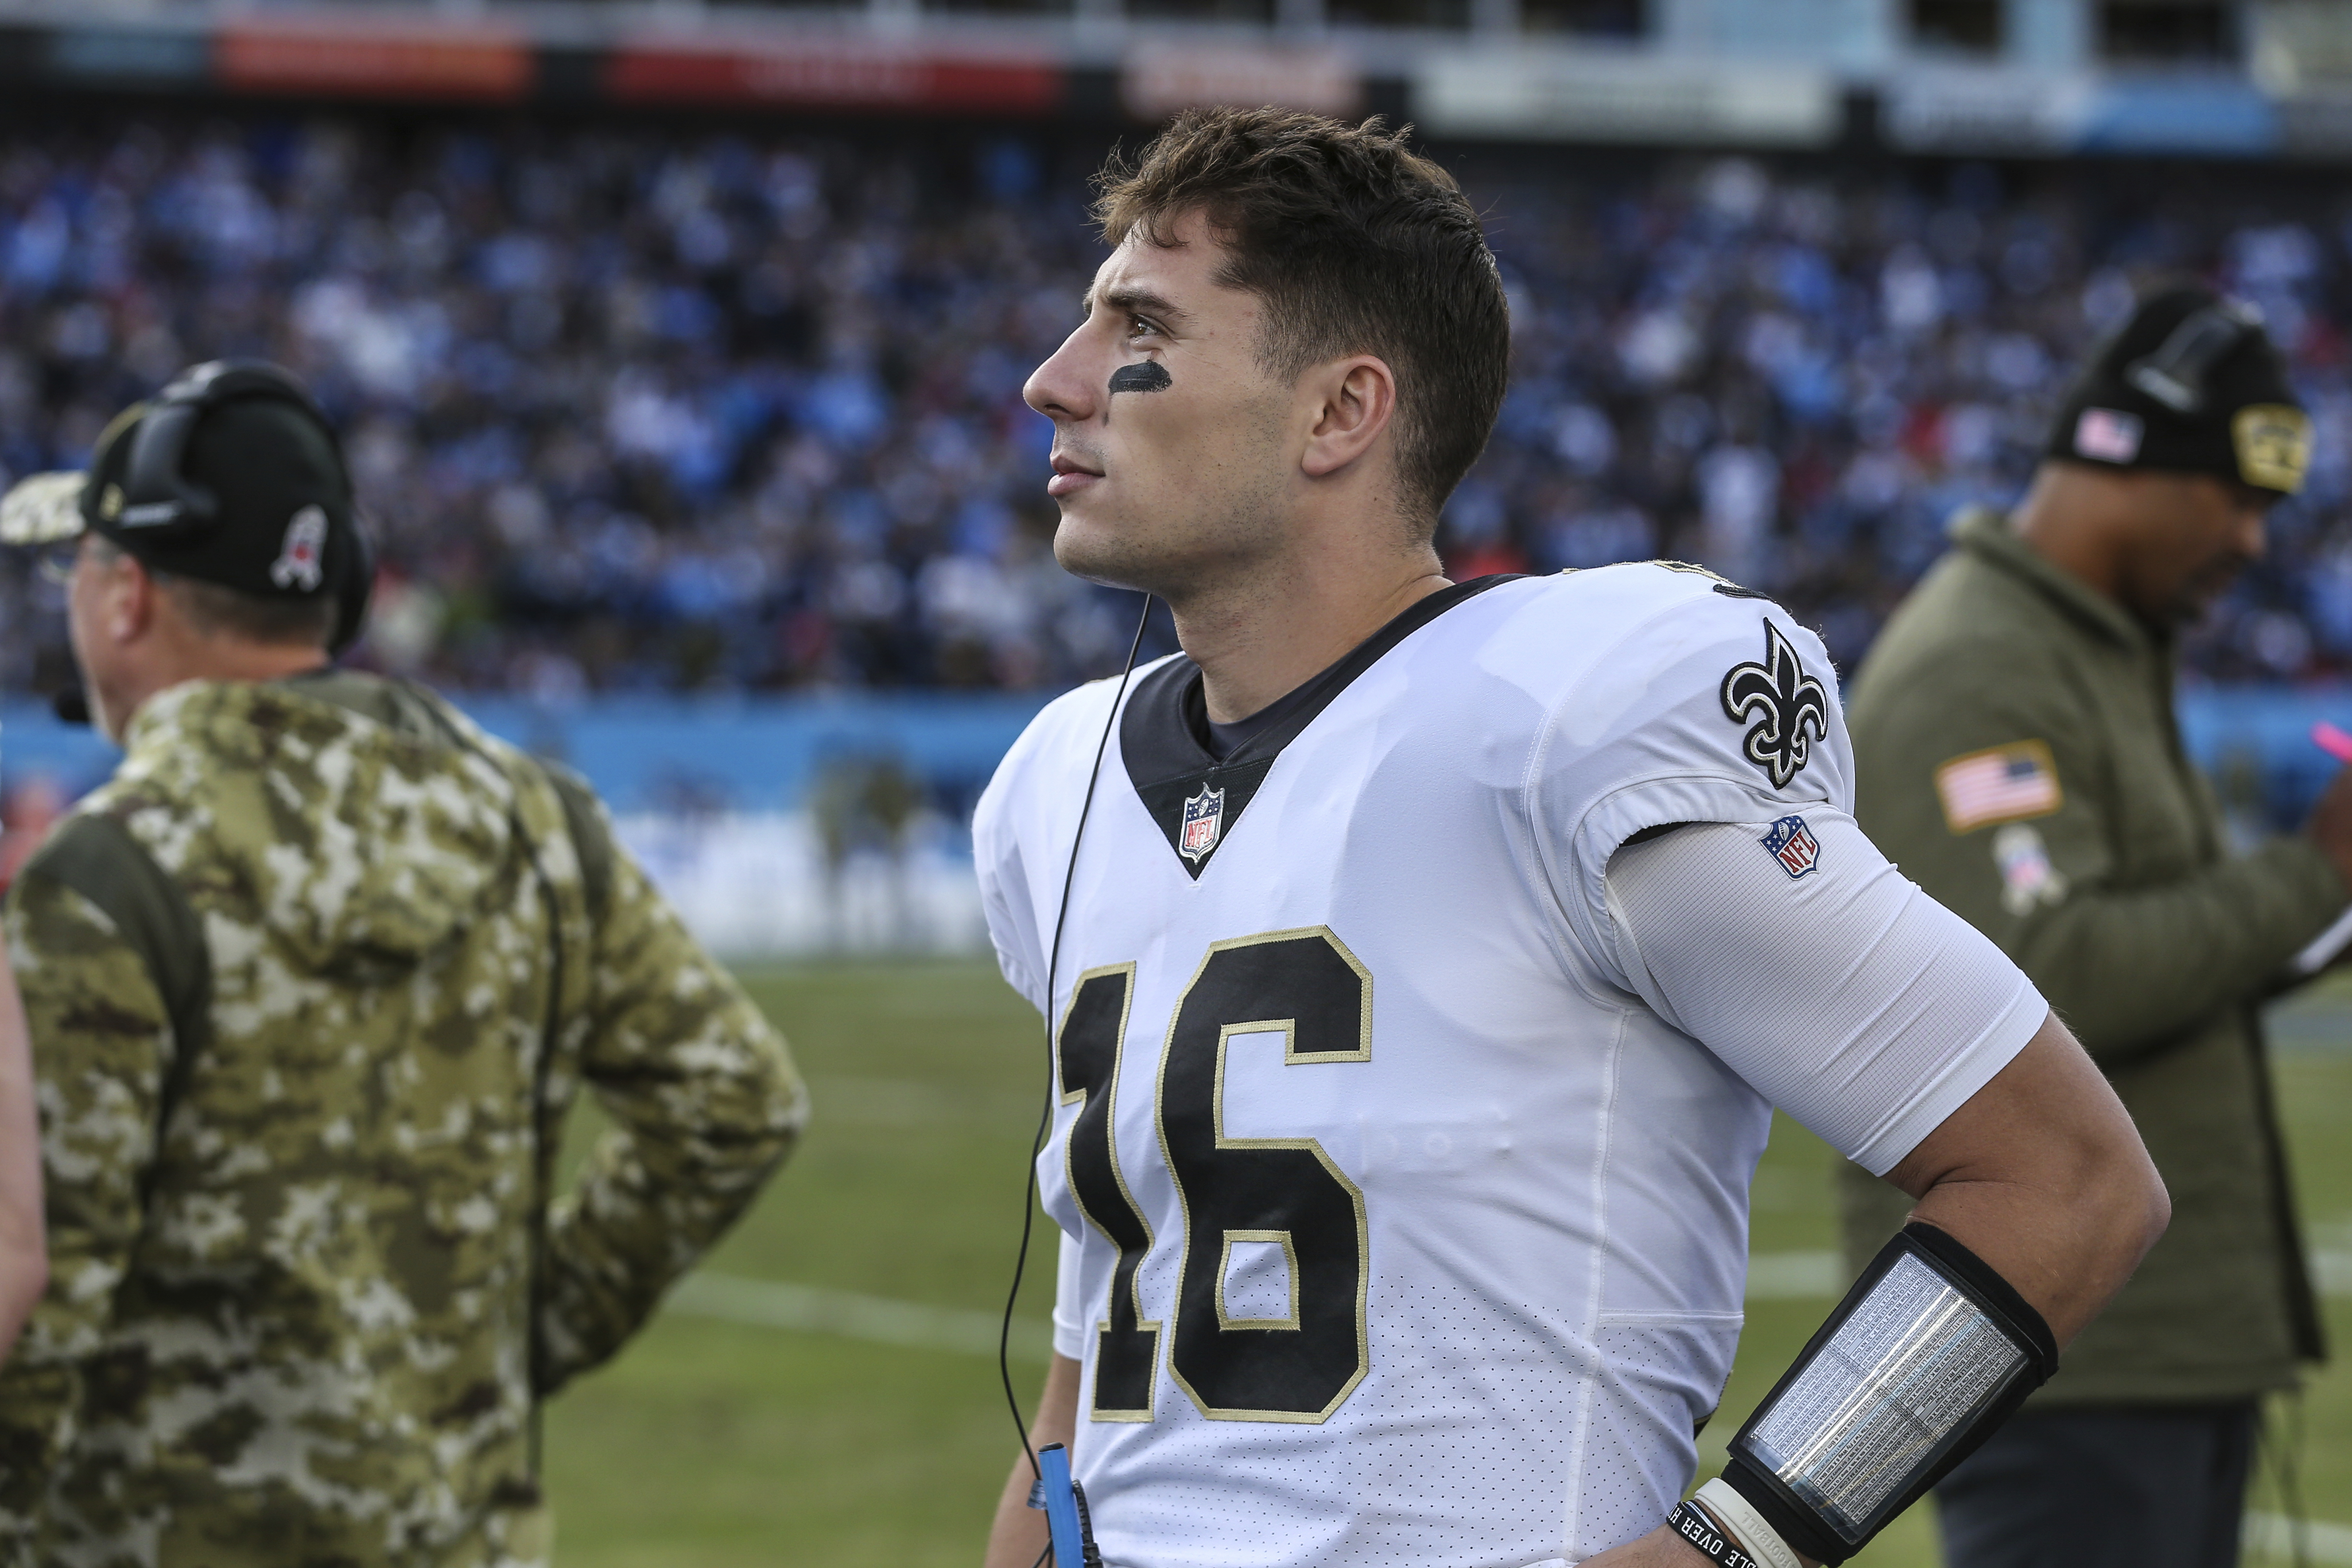 Ian Book to make first NFL start after Hill, Siemian, more Saints